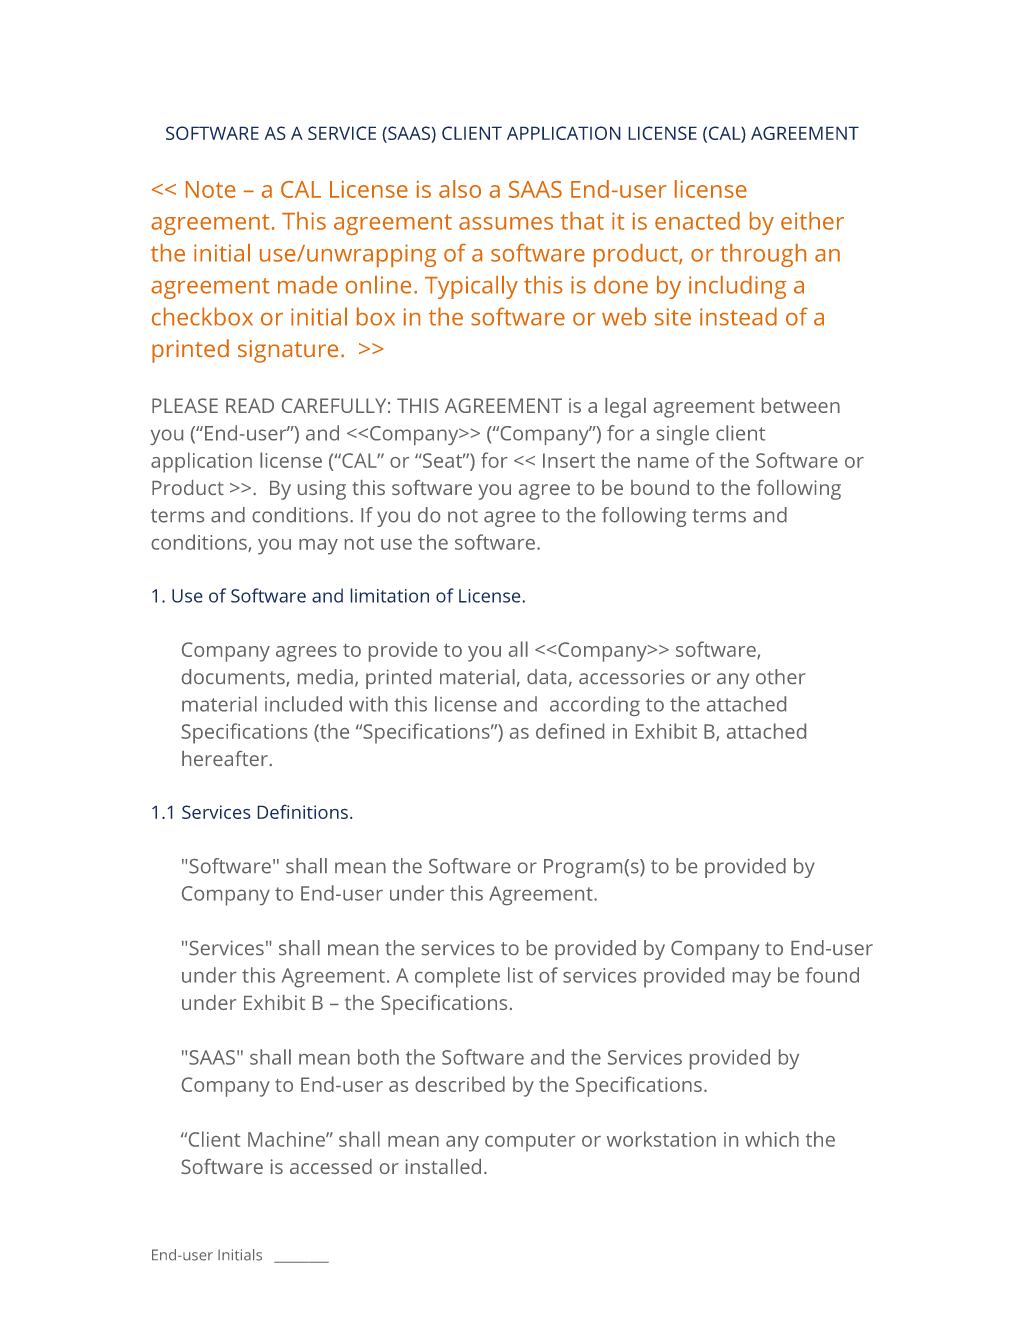 User Agreement Template Saas Software As A Service Client License 3 Easy Steps